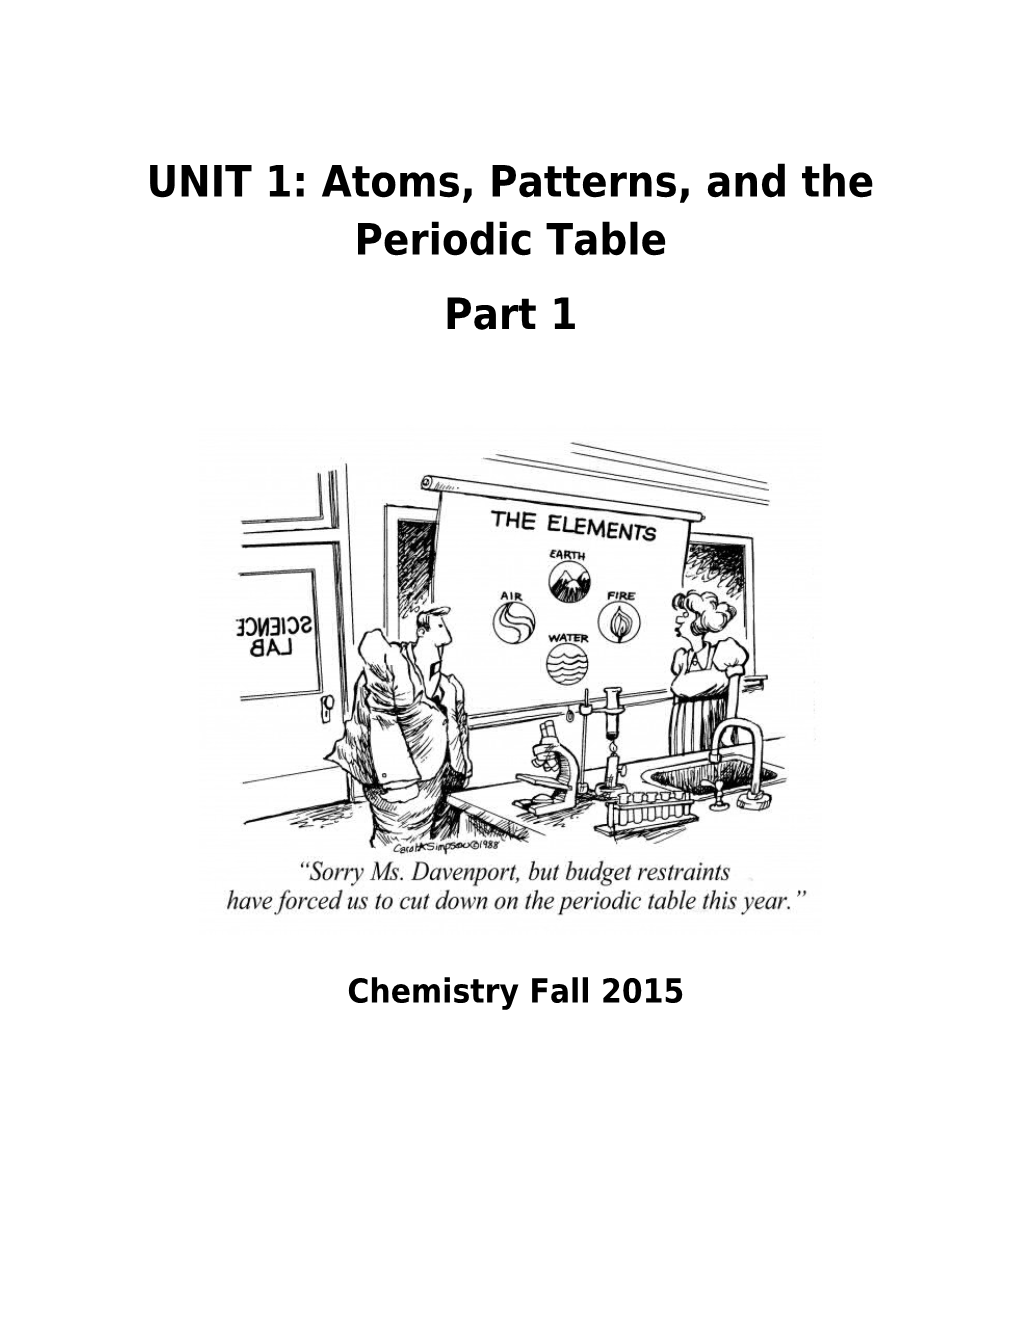 UNIT 1: Atoms, Patterns, and the Periodic Table